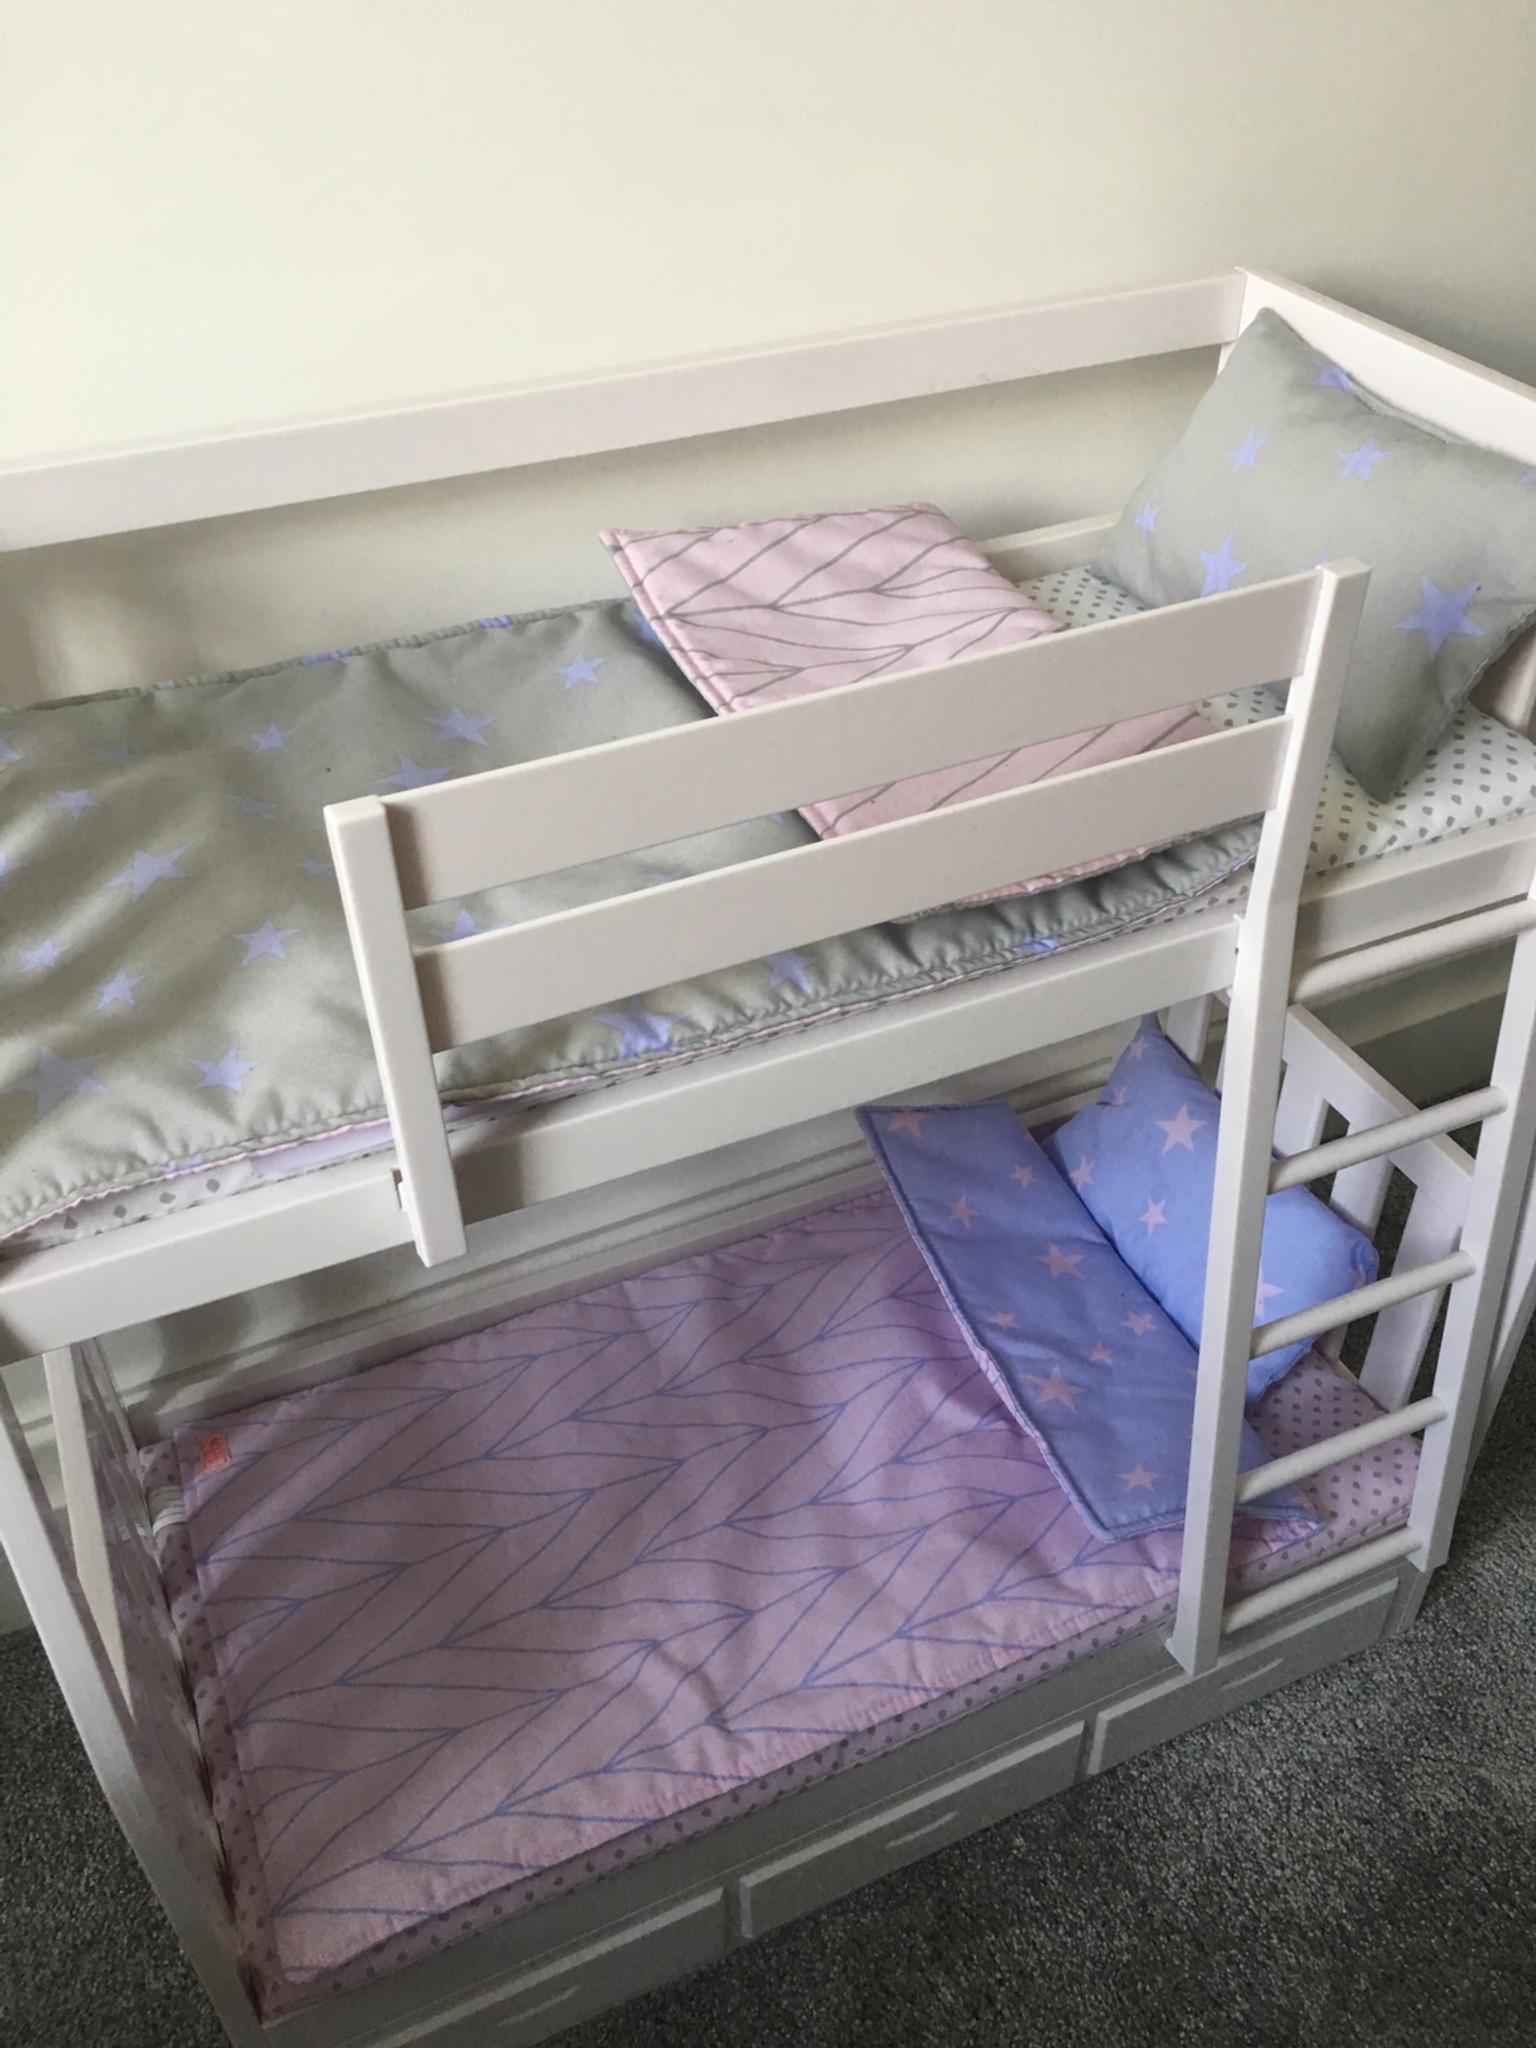 Our Generation Dream Bunk Beds In St, New Generation Bunk Beds